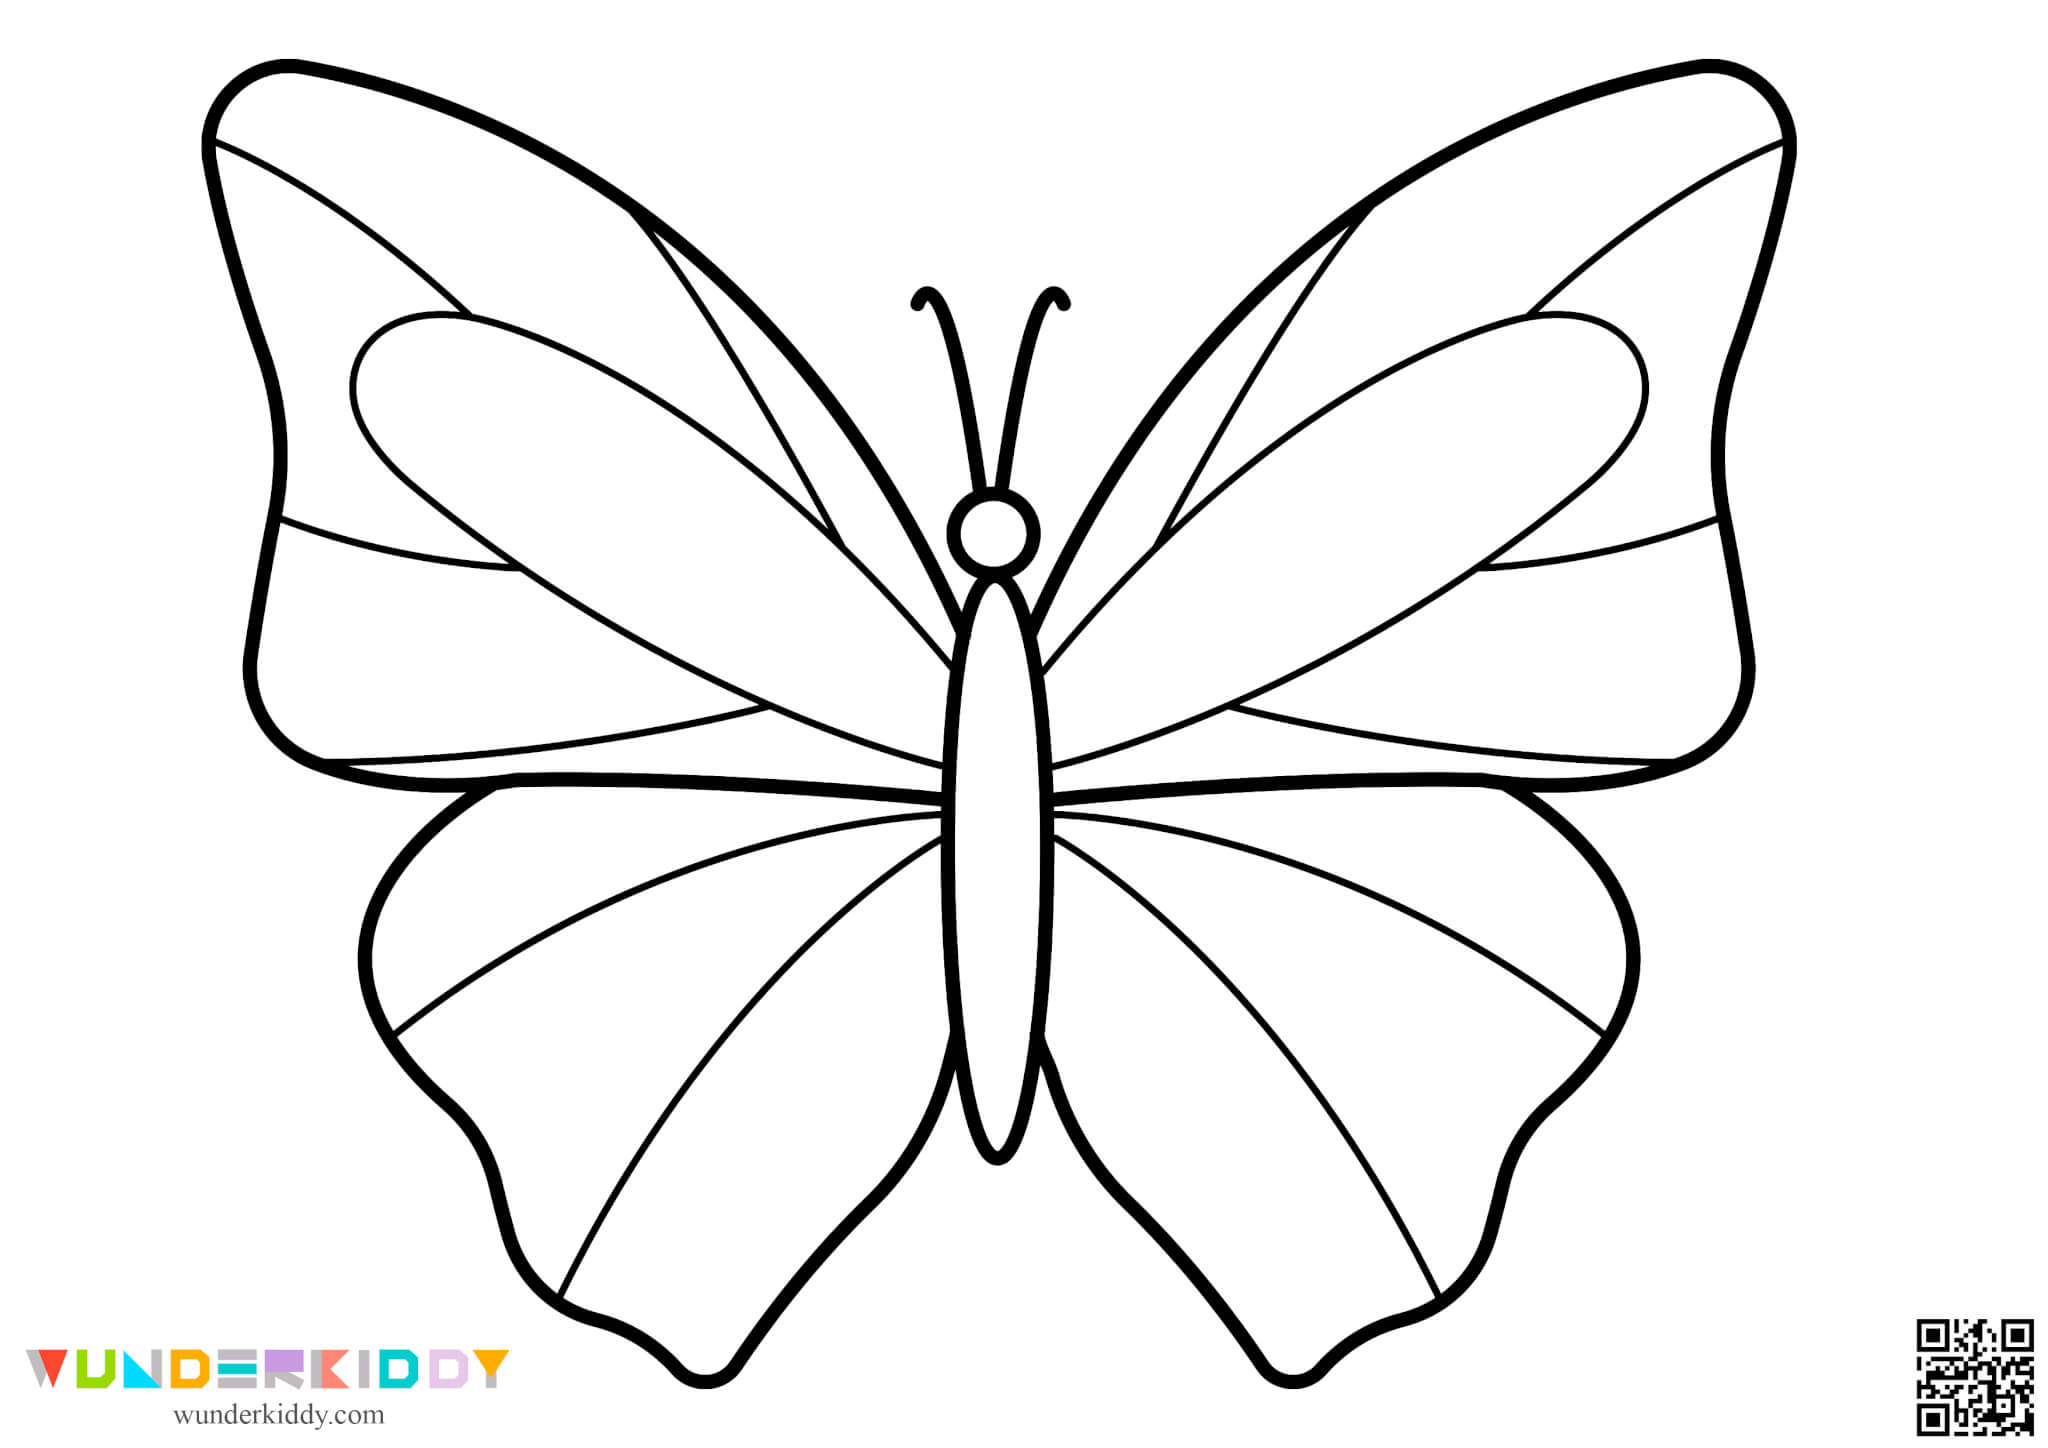 Butterfly Template Printable - Image 14